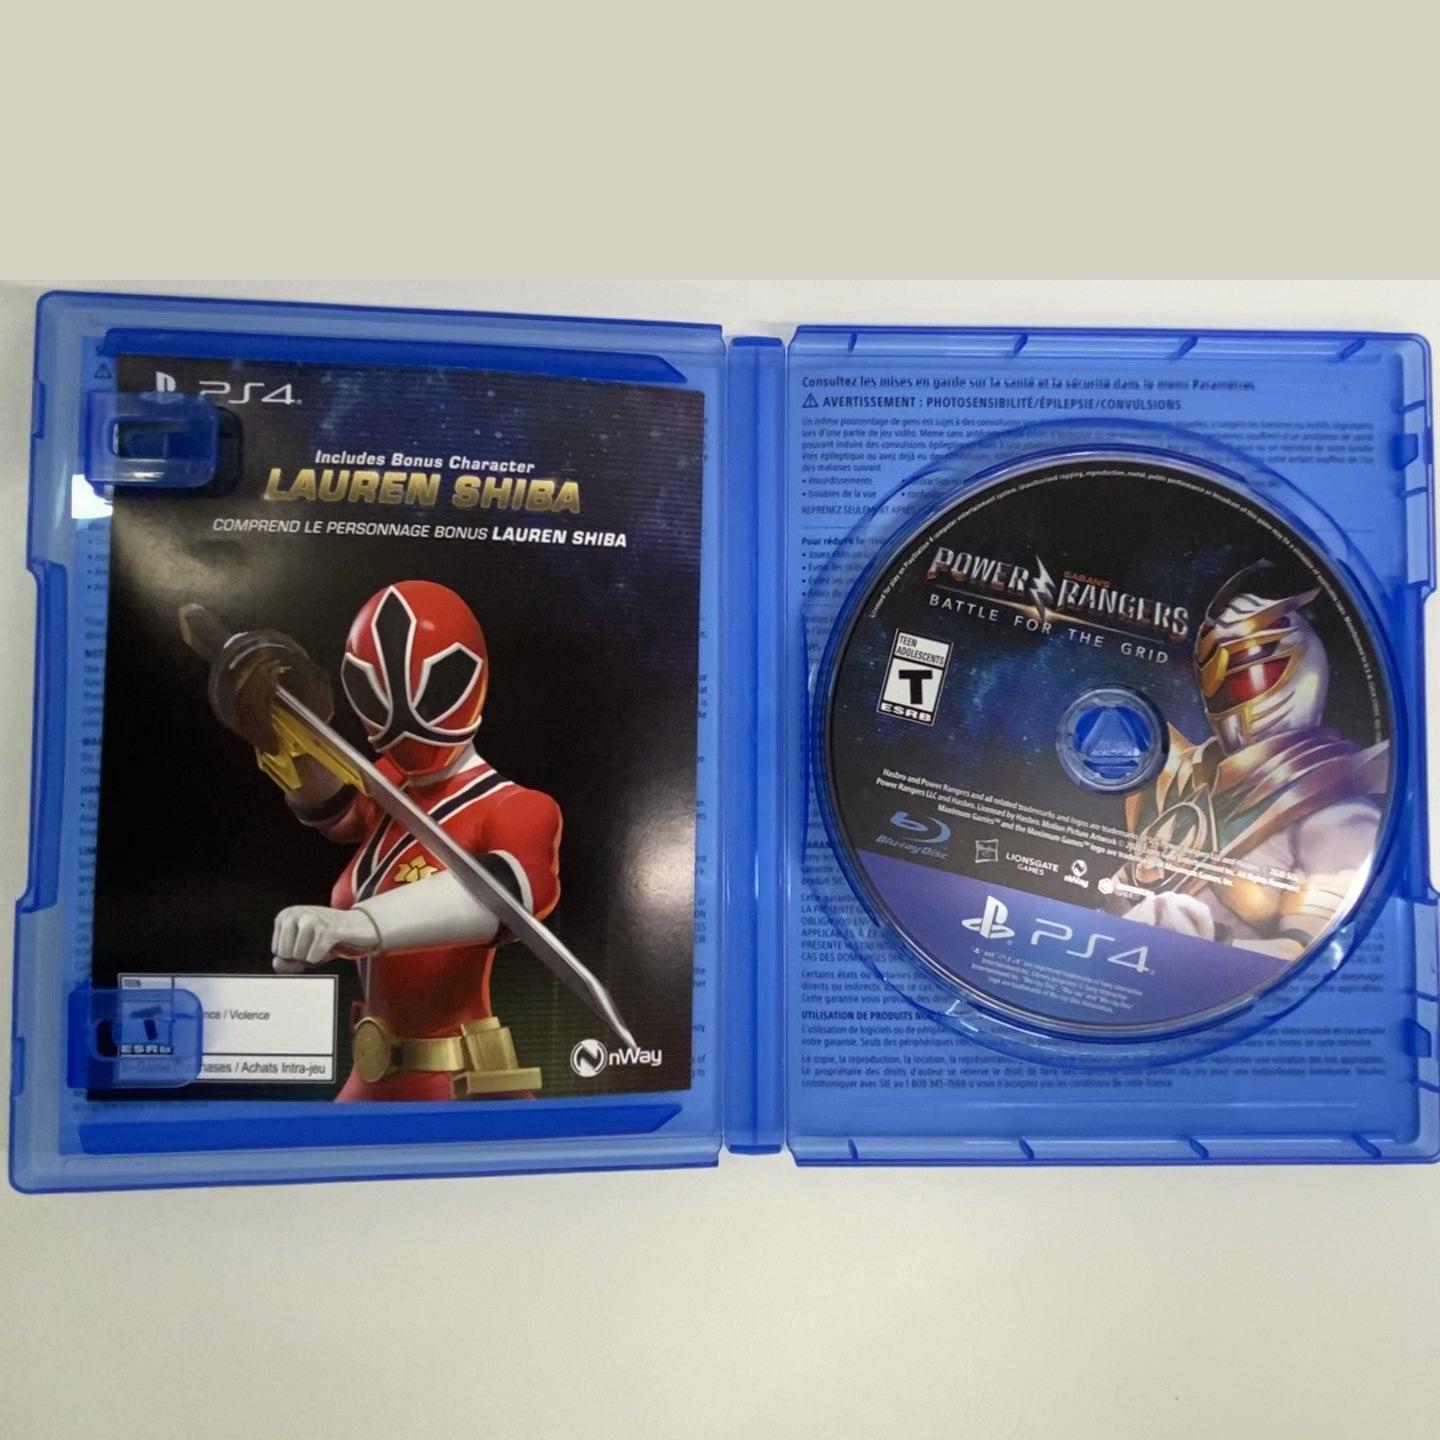 Power Rangers: Battle for the Grid Collector's Edition - (PS4) PlayStation 4 [UNBOXING] Video Games Maximum Games   